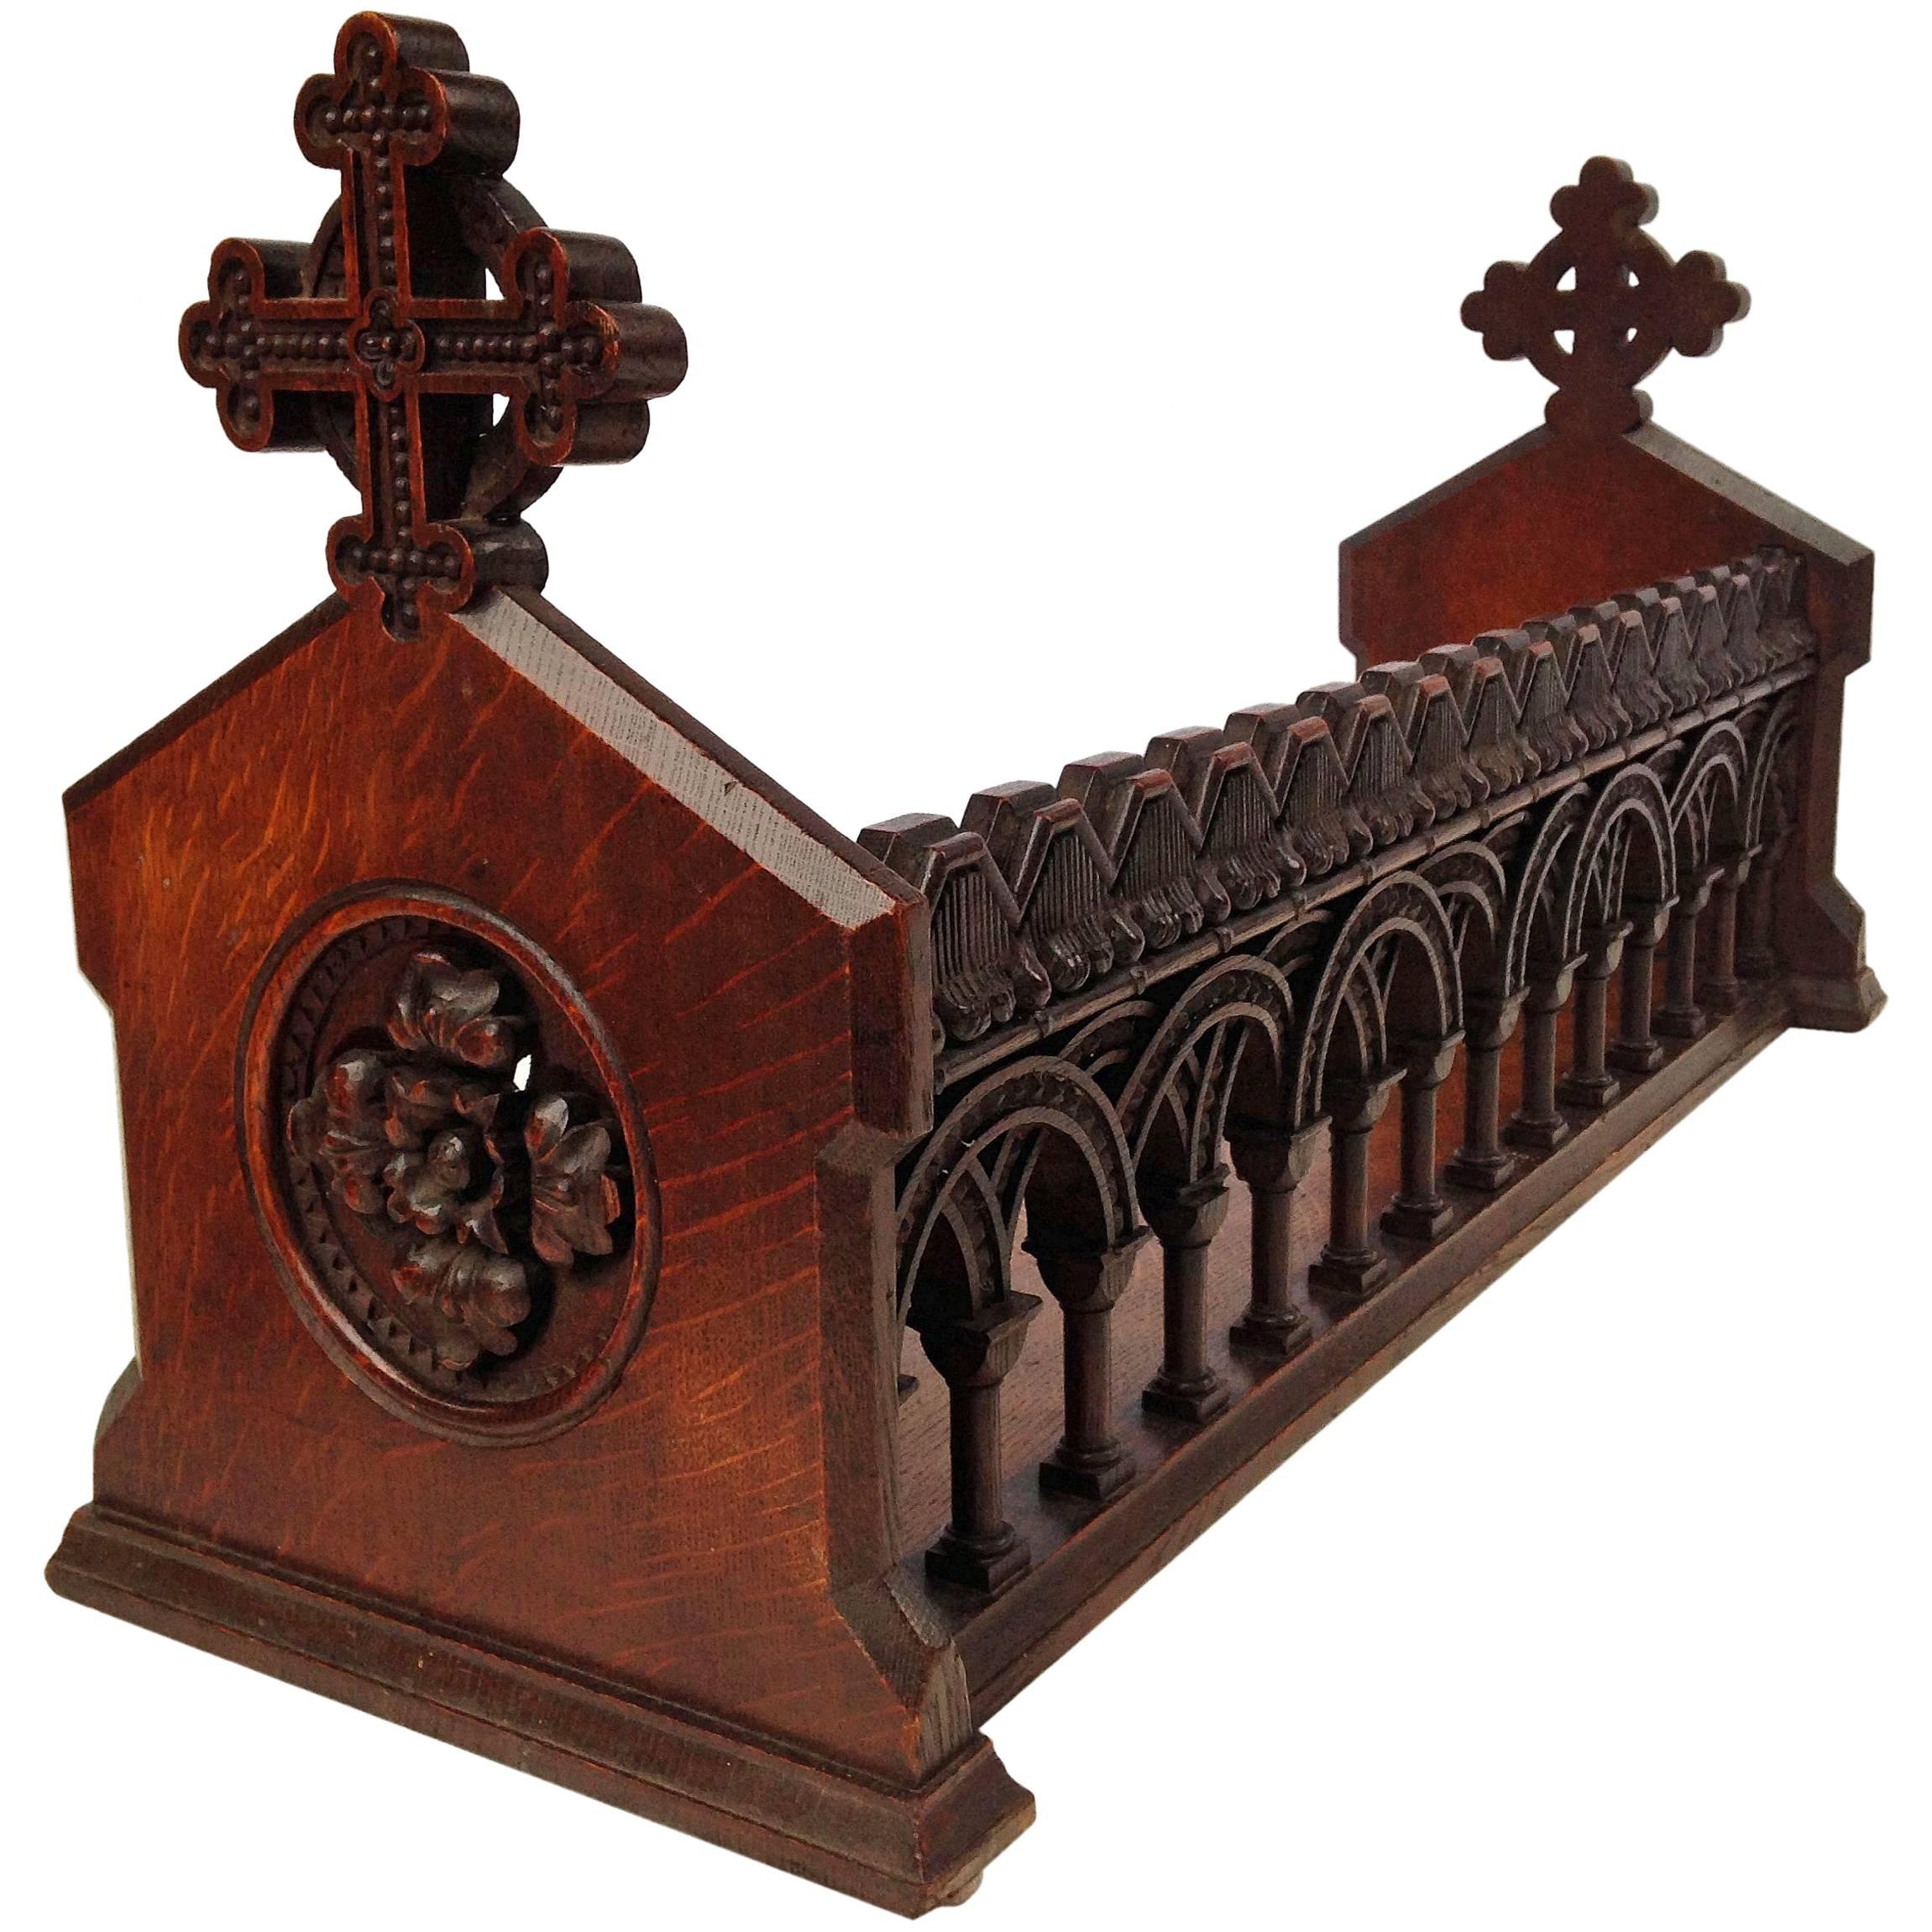 English Ecclesiastical Book Trough in the Gothic Style